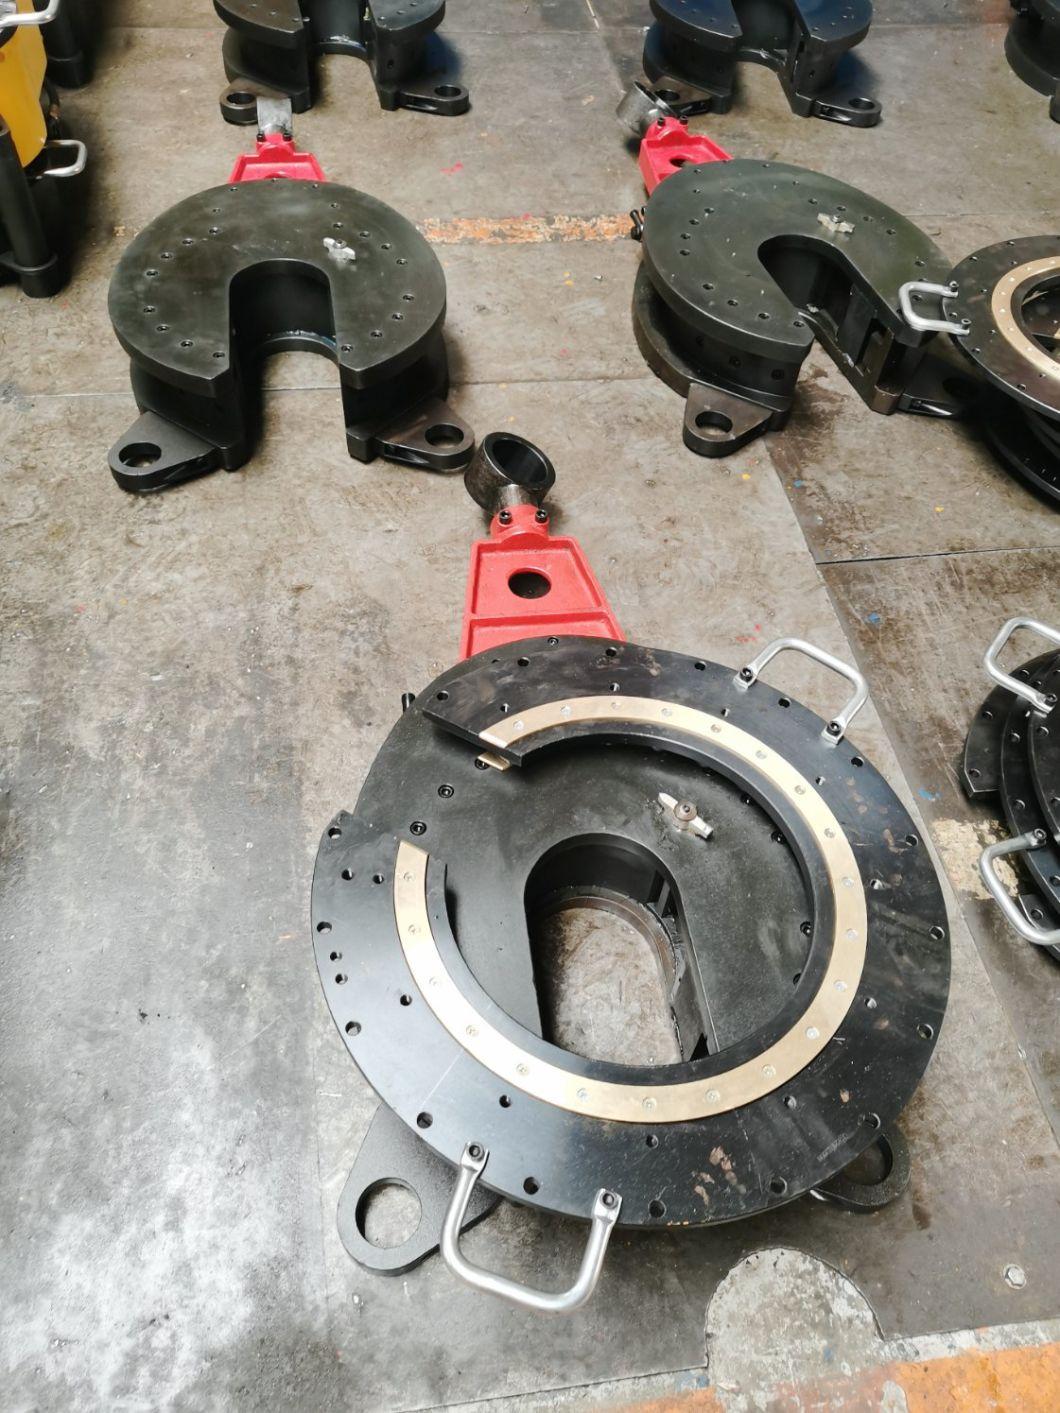 Tq508/70 Workover Hydraulic Power Tong Used in Oilfield for Drilling Operation Tool